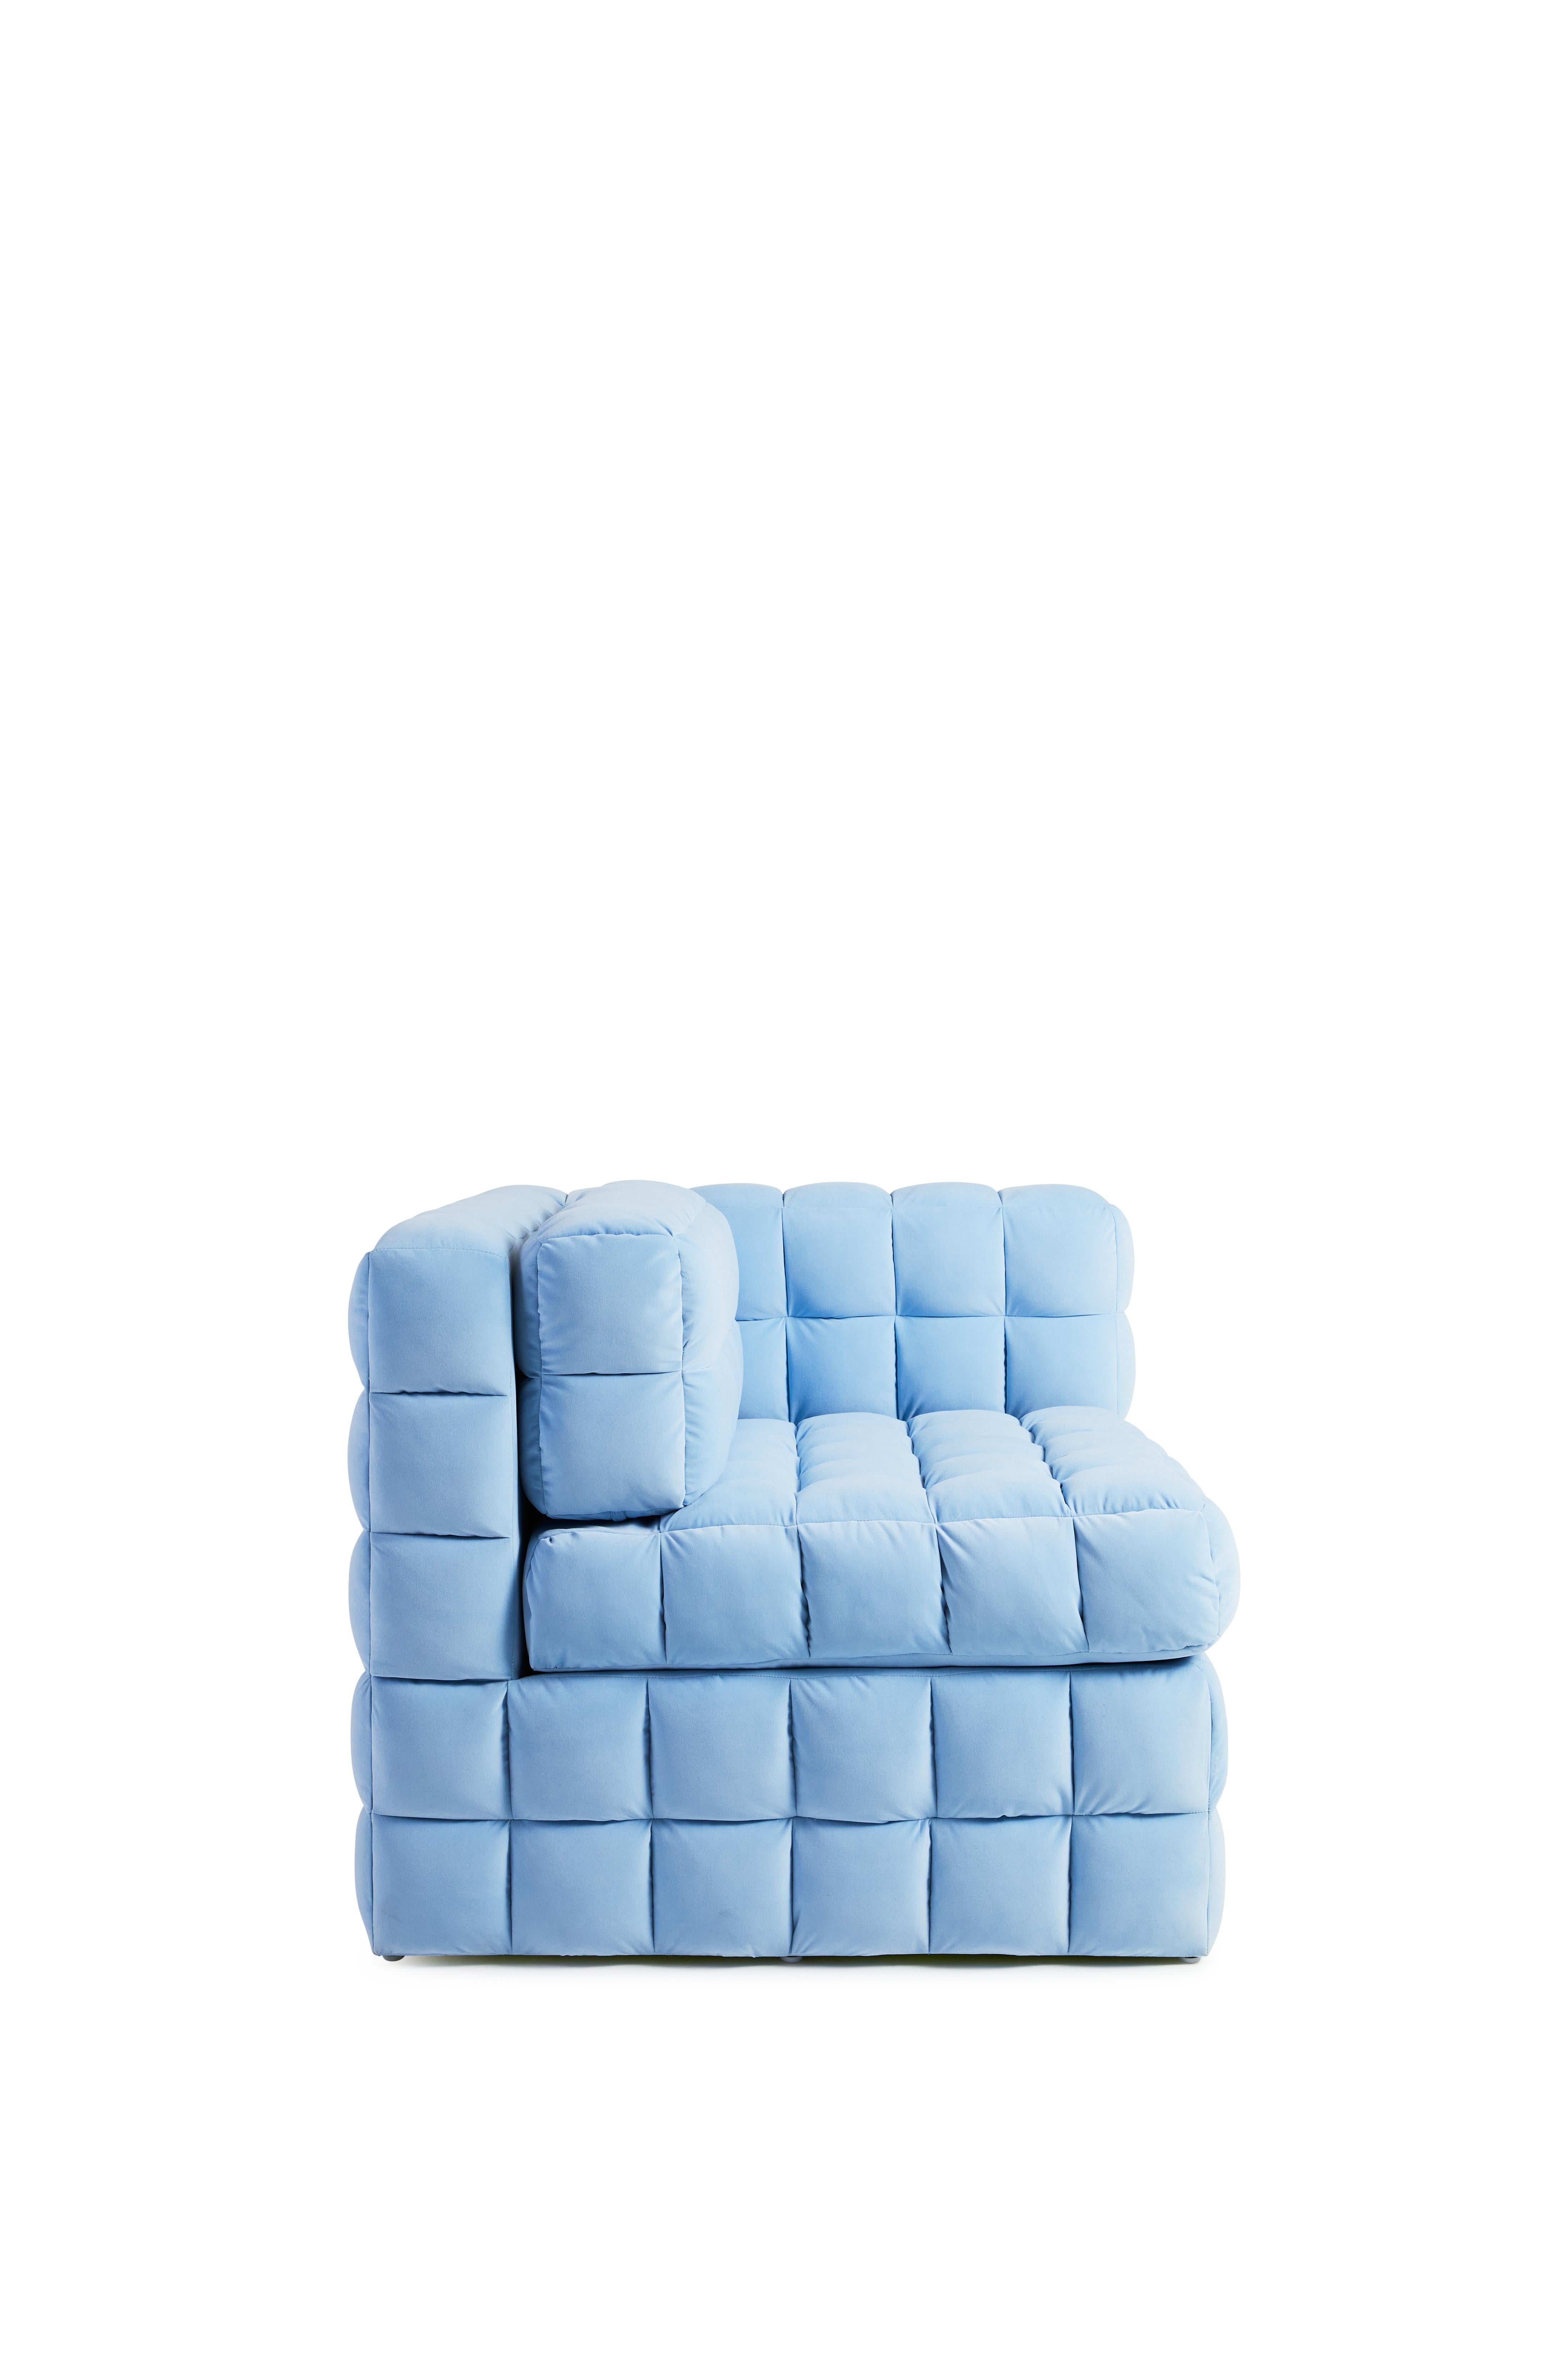 Hand-Crafted Quilted, Modular Lounge Chair  For Sale